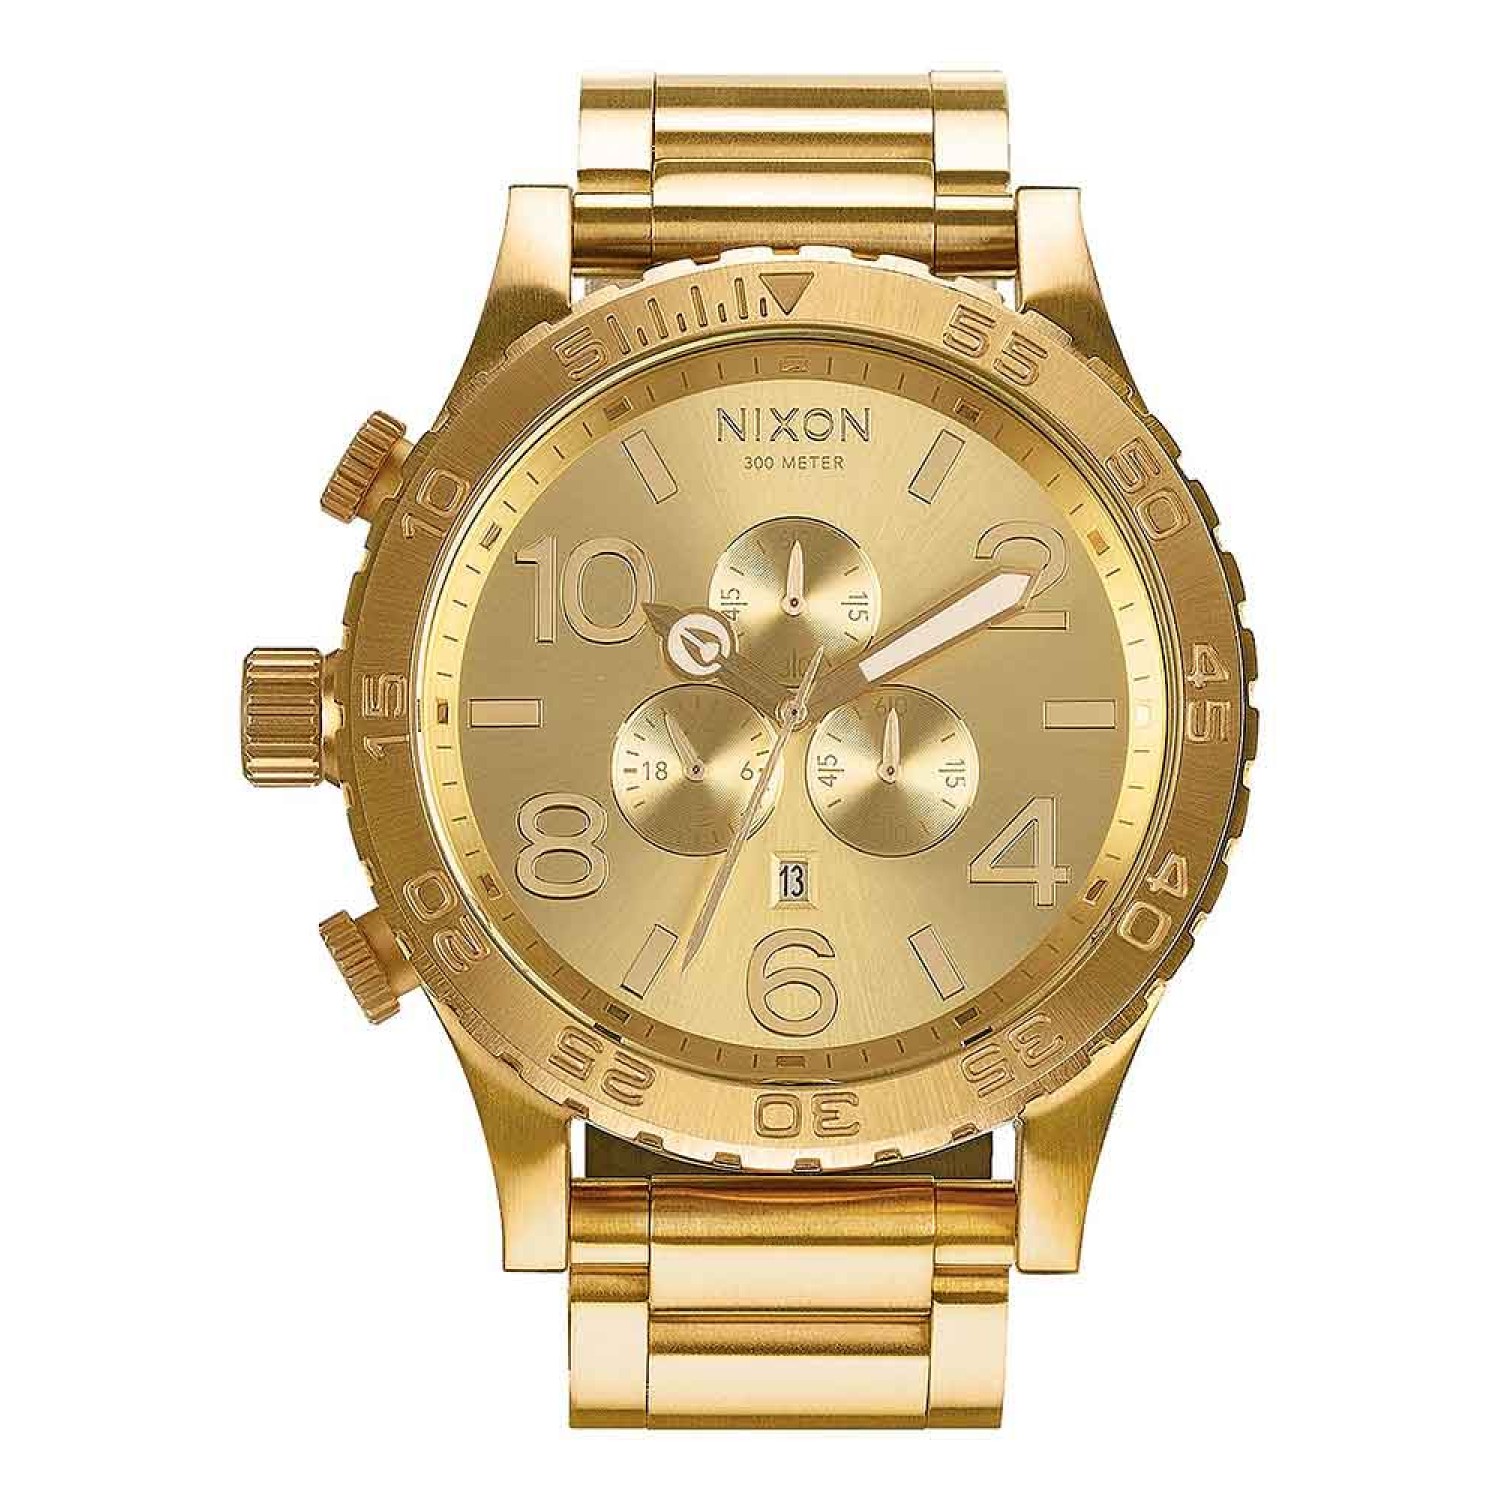 A083502 NIXON Gold Chronograph Watch. Handsome, easy-to-read 51 mm design that launched the oversized trend, with 3 CD textured sub dials 2 Year  Guarantee 3 Months No Payments and Interest for Q Card holders This watch is pressure rated at 300 metres @ch